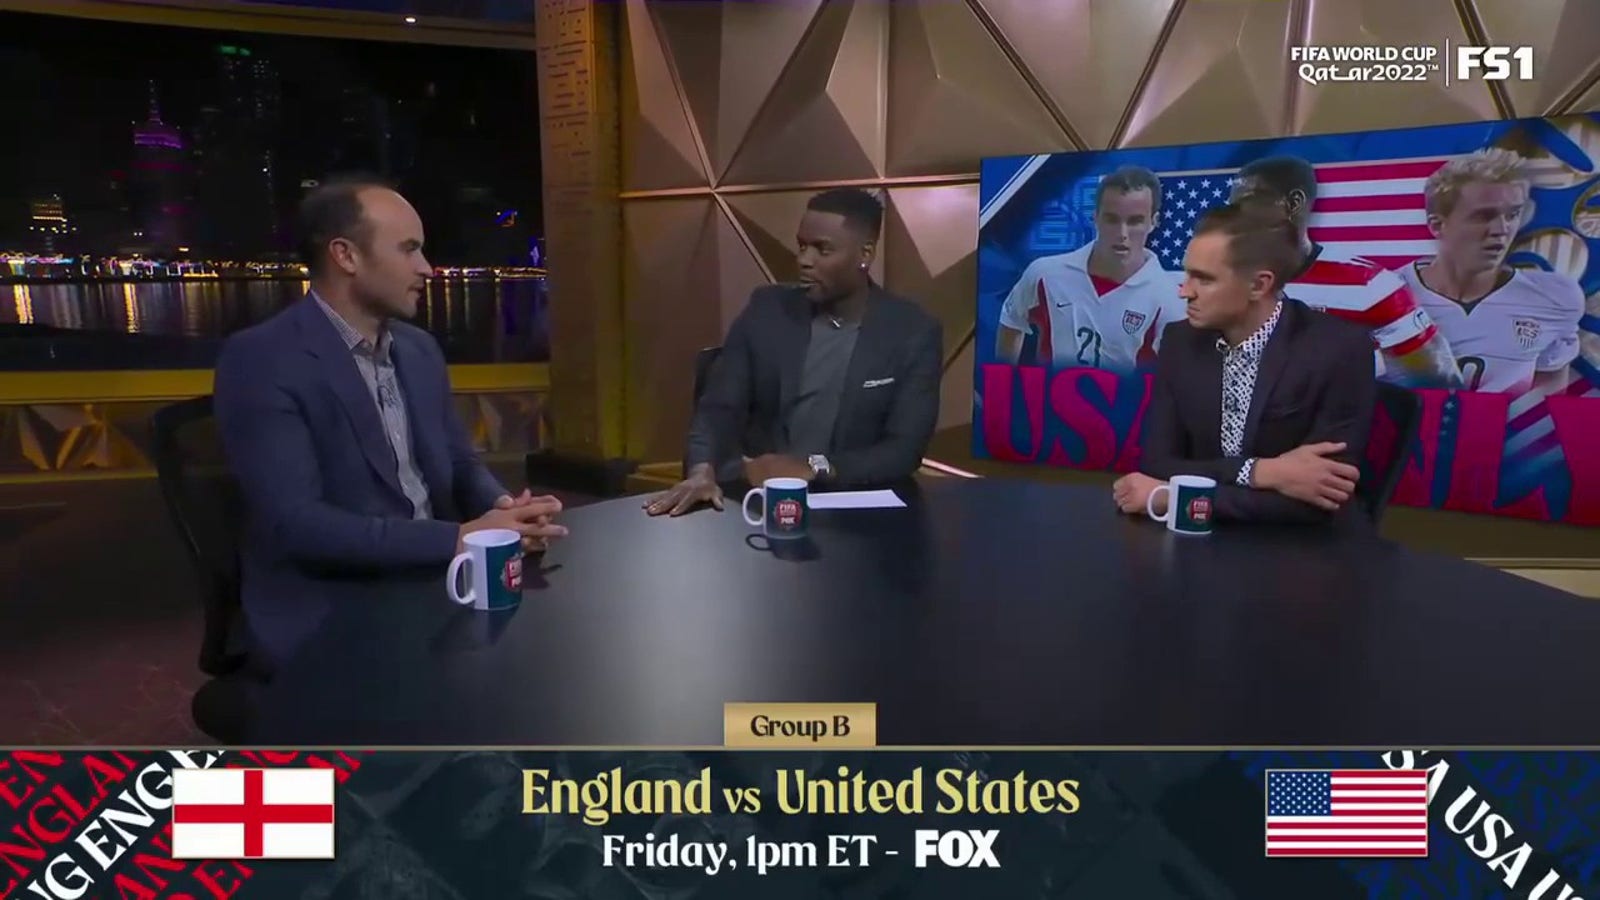 England vs USA Preview: What's the Best USMNT Game Plan?